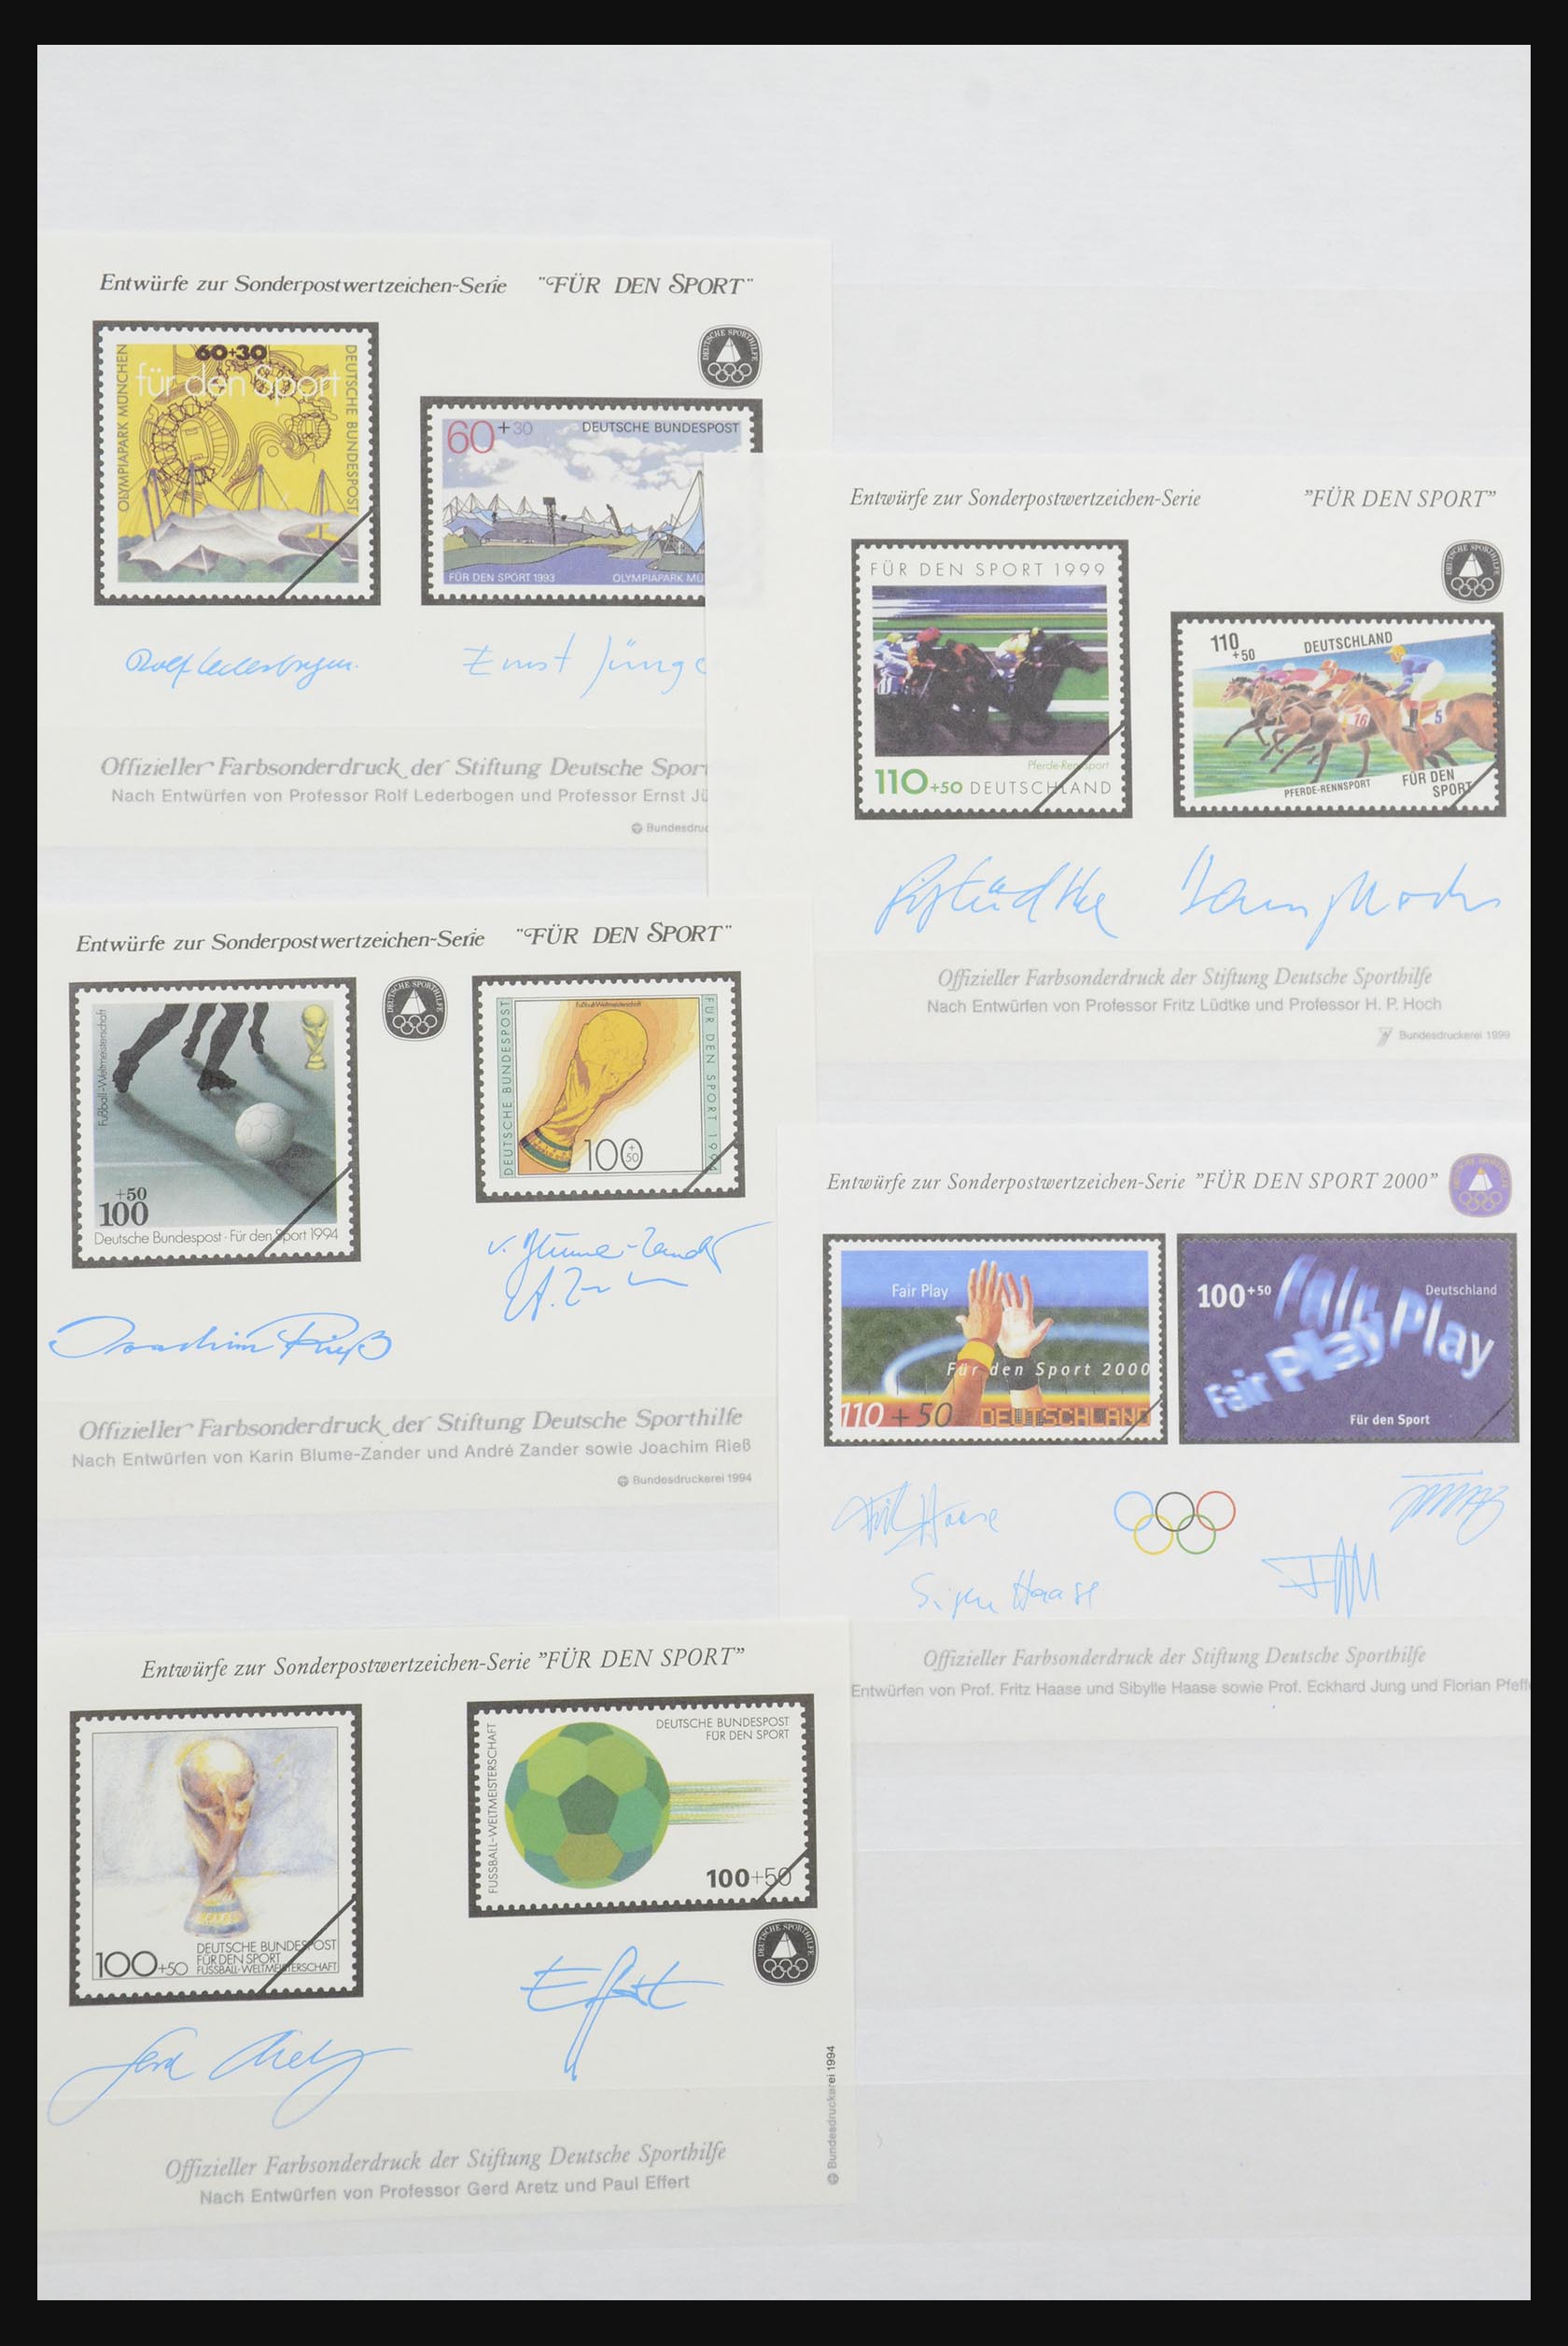 32050 008 - 32050 Bundespost special sheets 1980-2010.